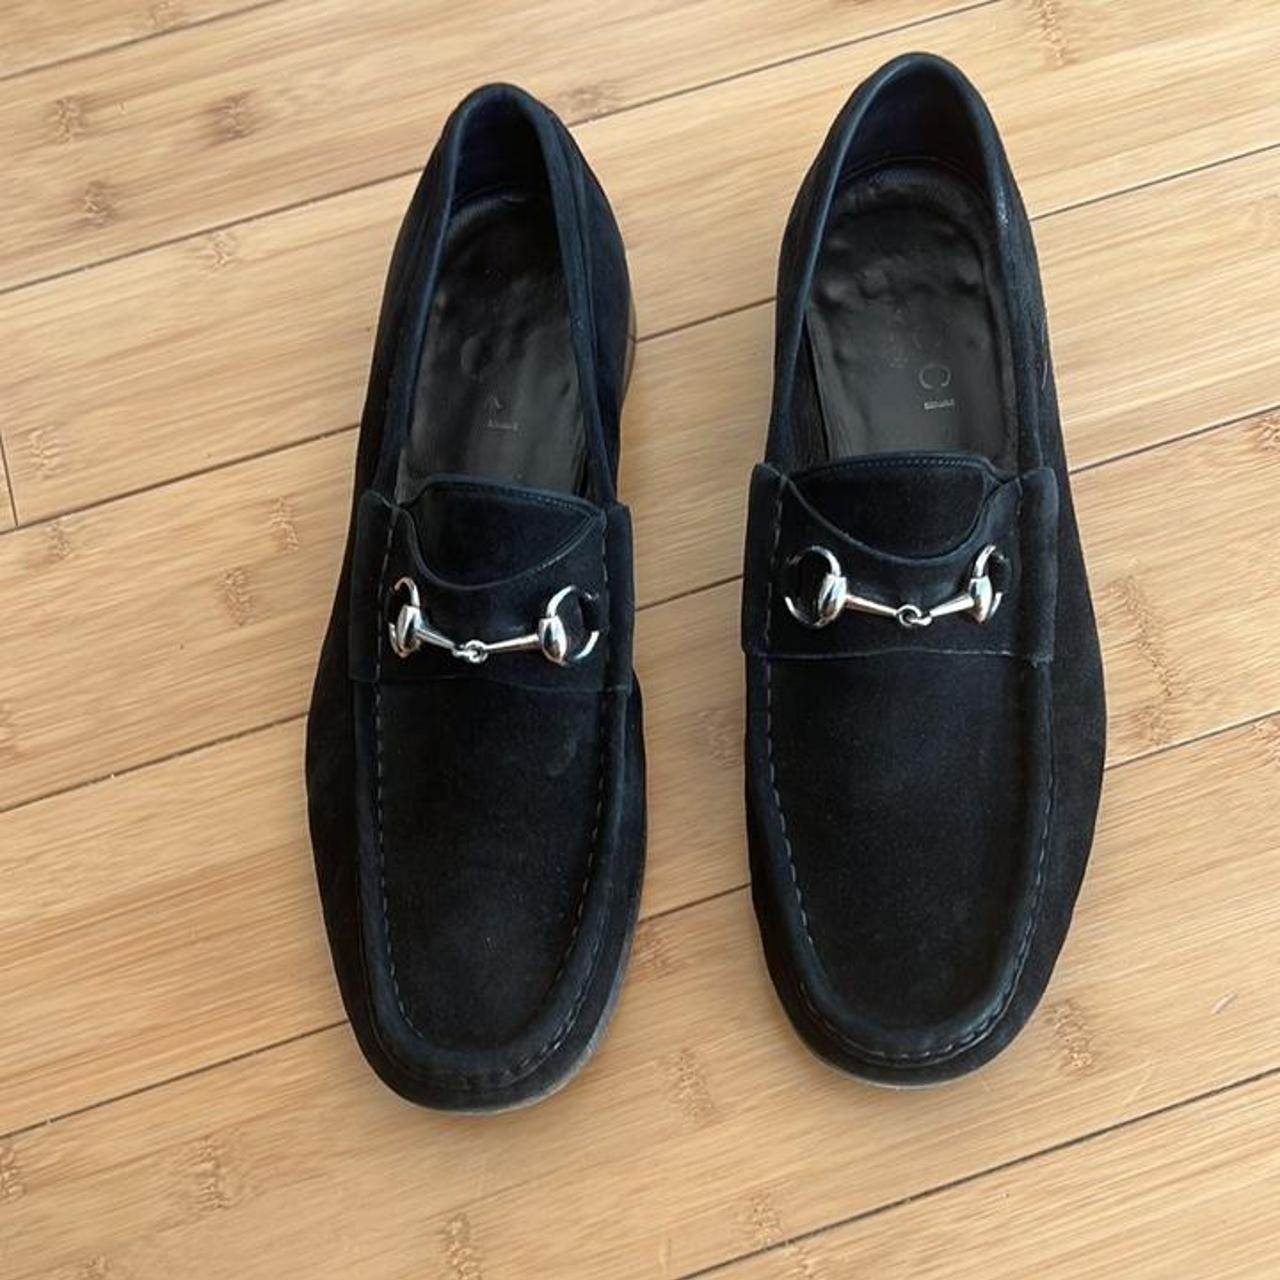 Product Image 2 - Men’s Gucci loafers

Black suede loafers.